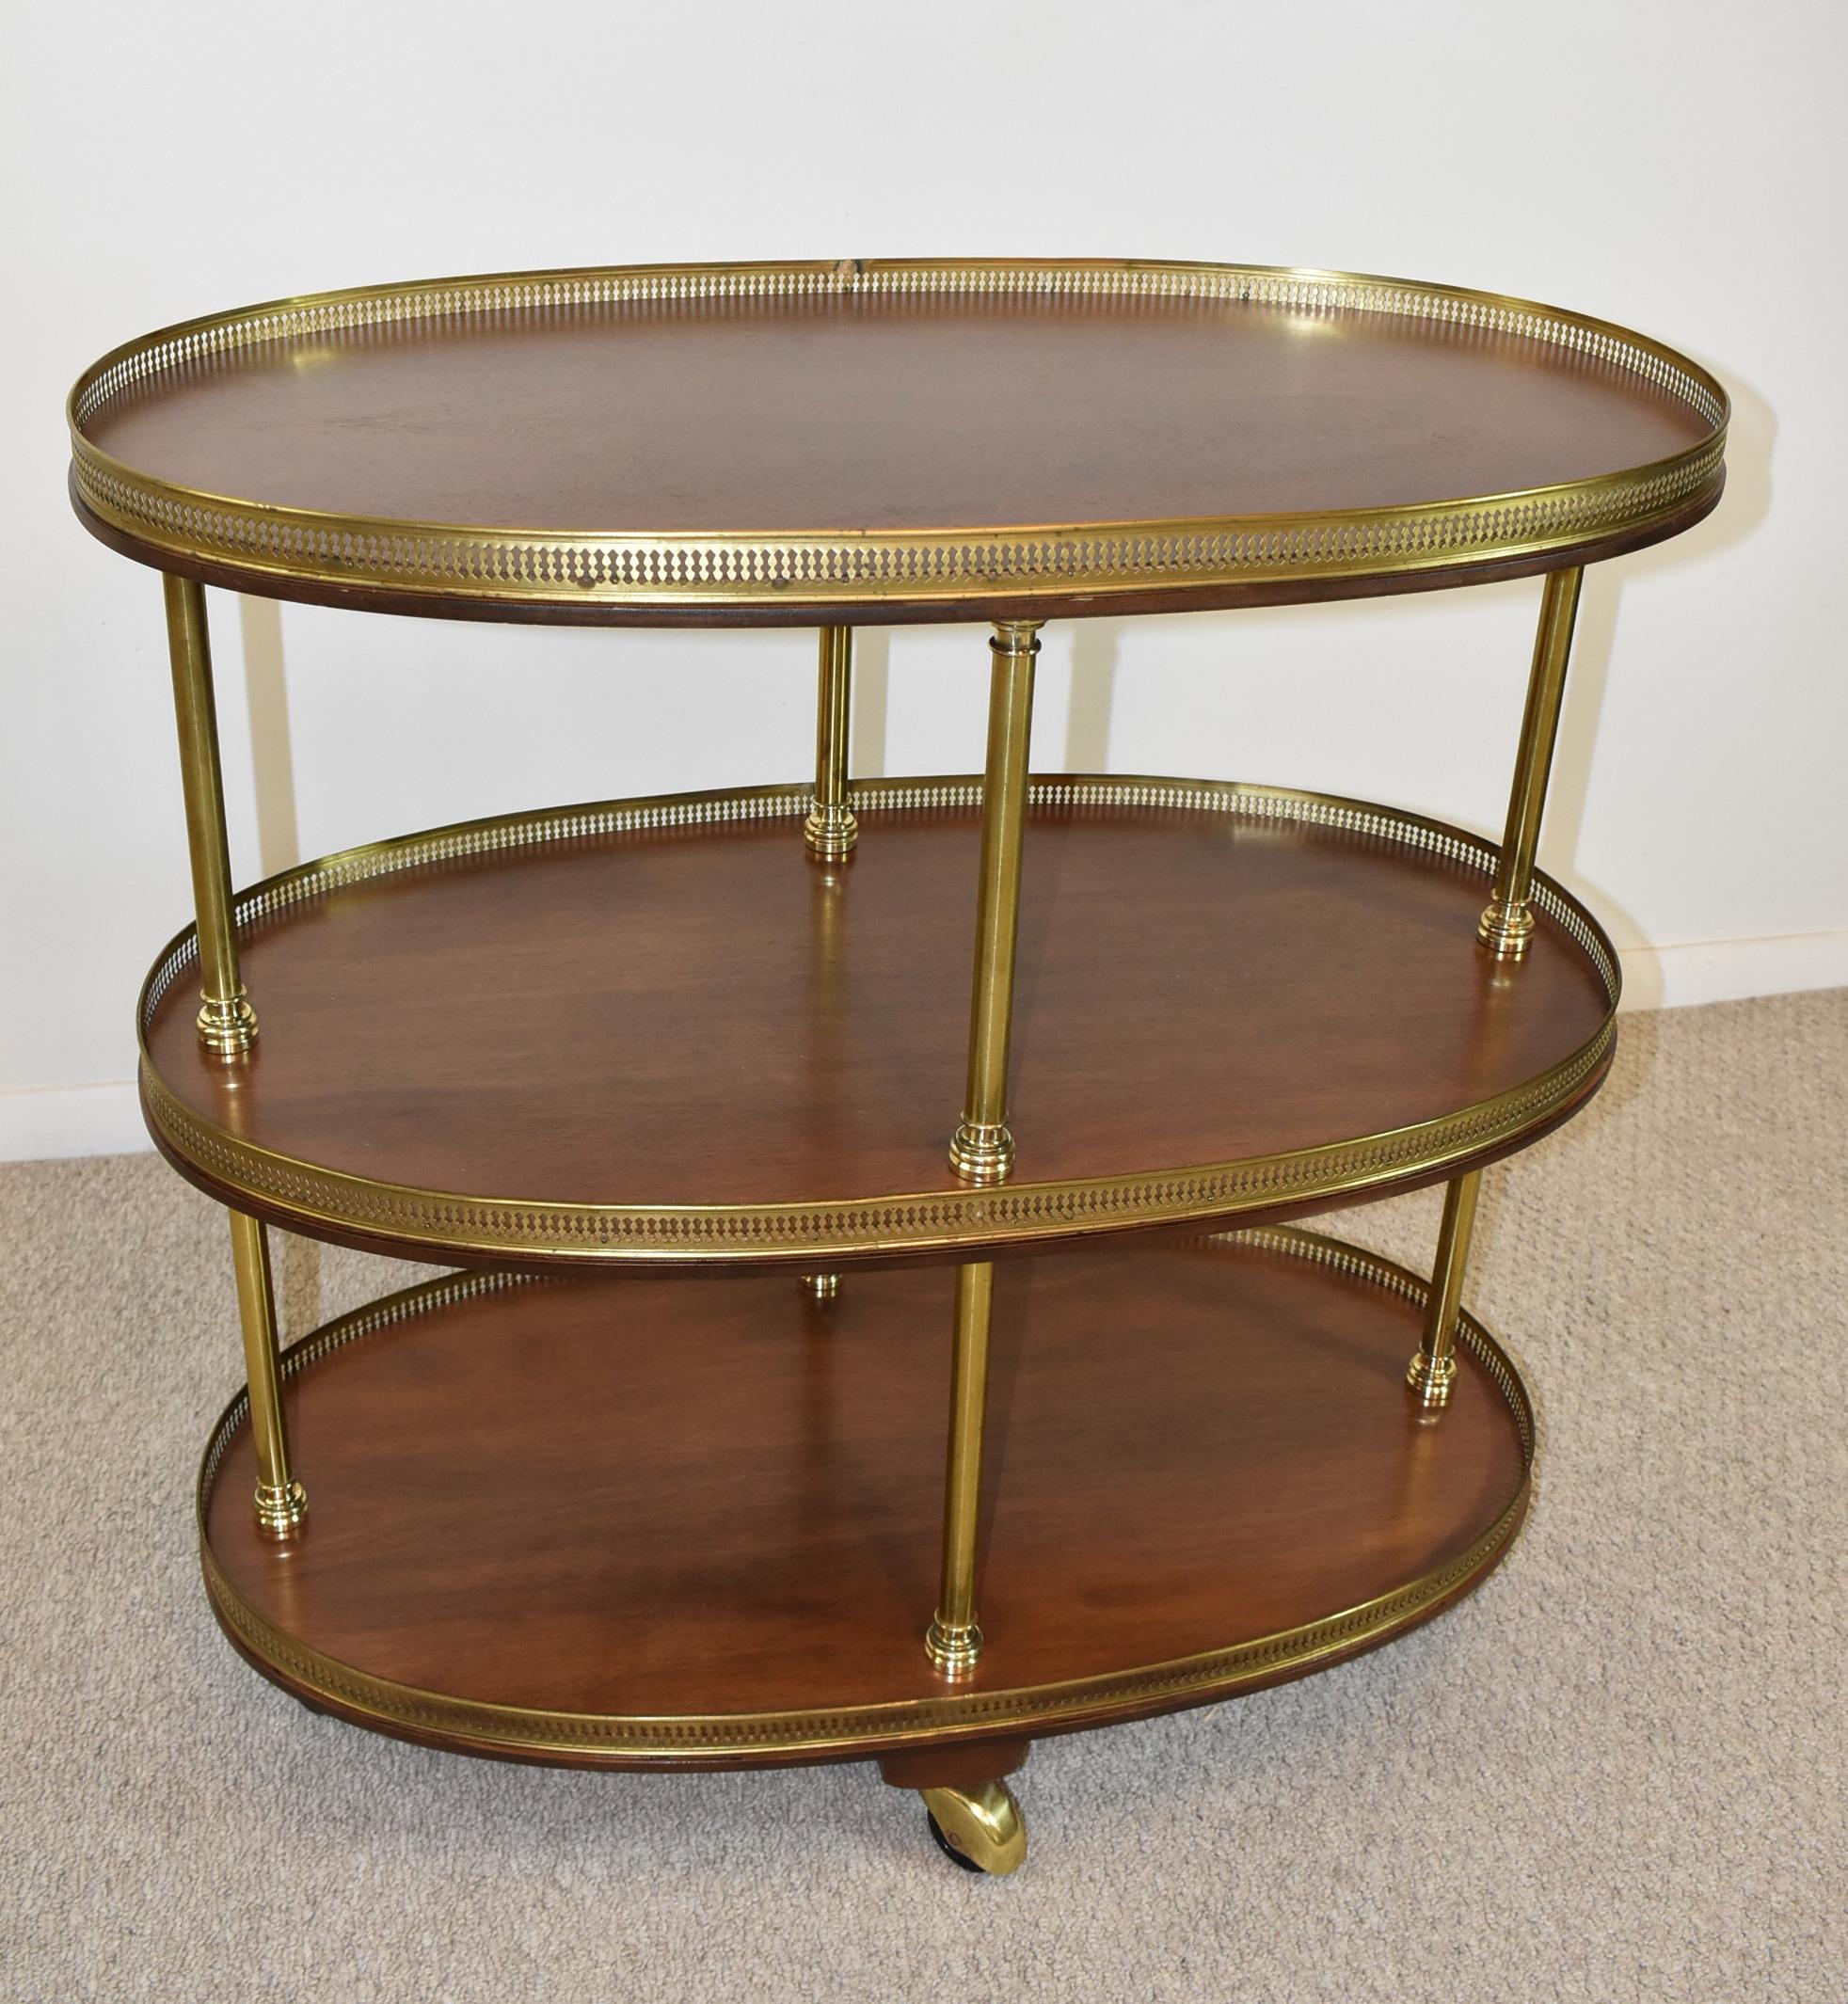 3 tier Maison Jansen Beverage Cart. Each shelf has pierced brass gallery with turned brass pillars and caps. Shelves are refinished walnut. Excellent vintage condition with minor wear to the wheel covers. 11 1/2